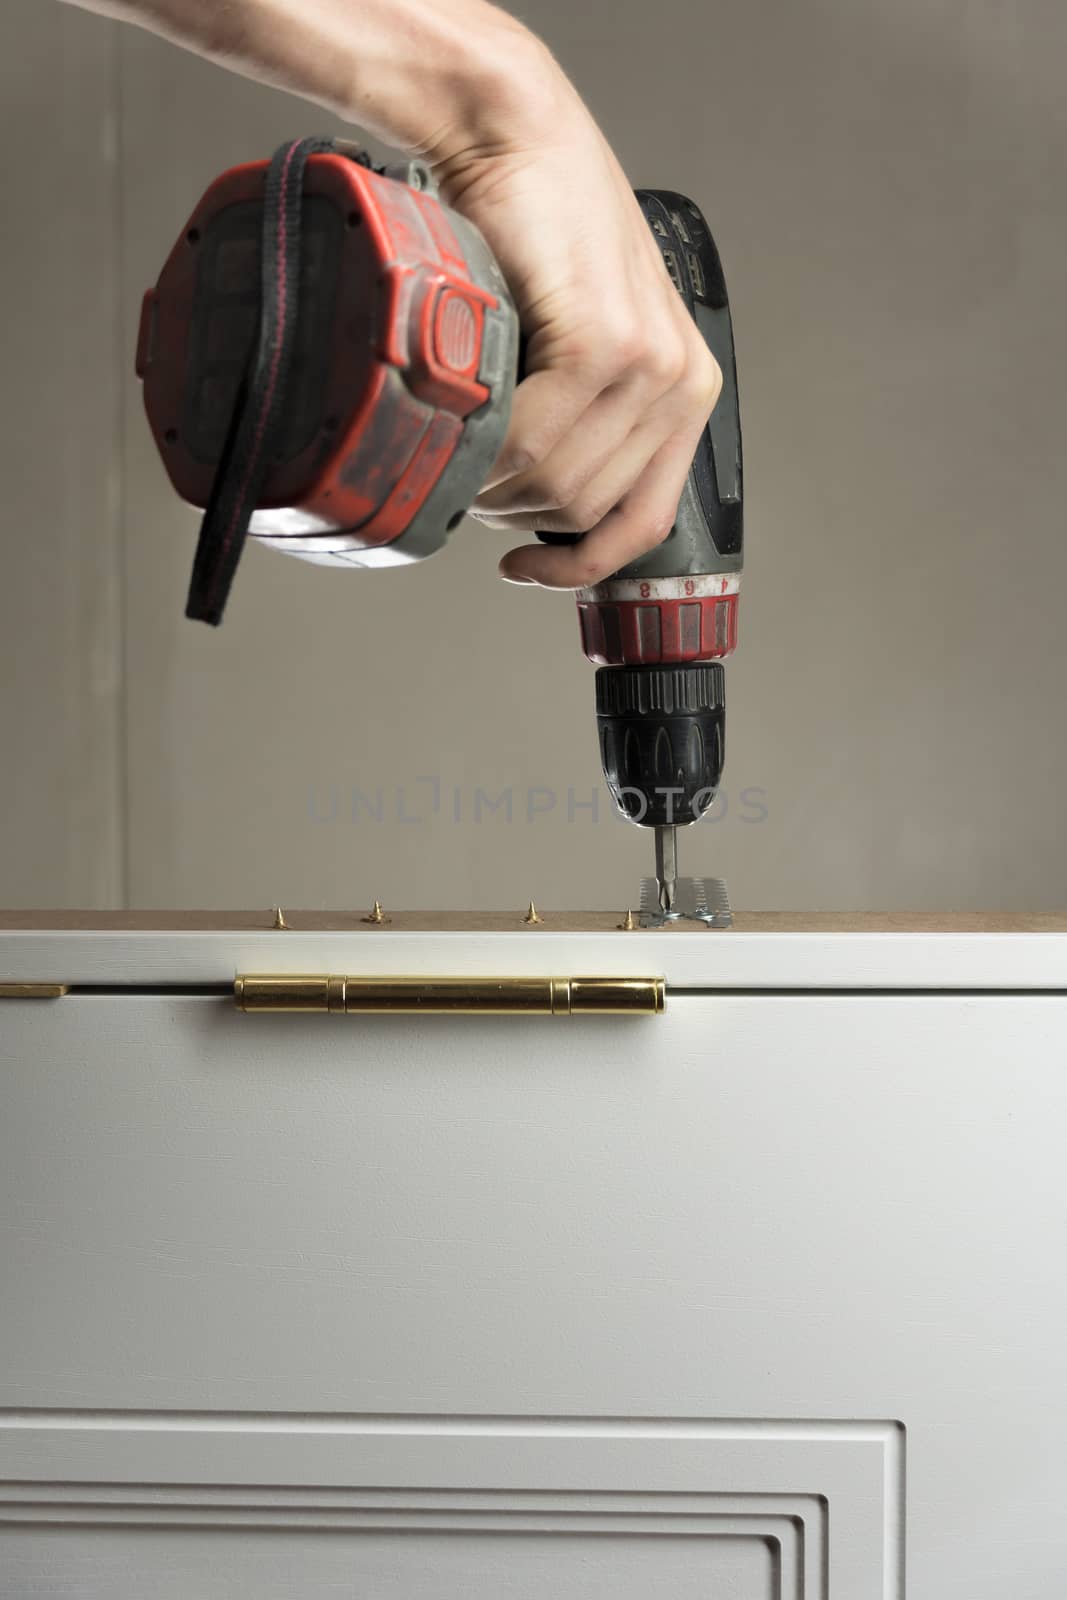 A worker twists a screw into the Board with a drill. The handyma by YevgeniySam